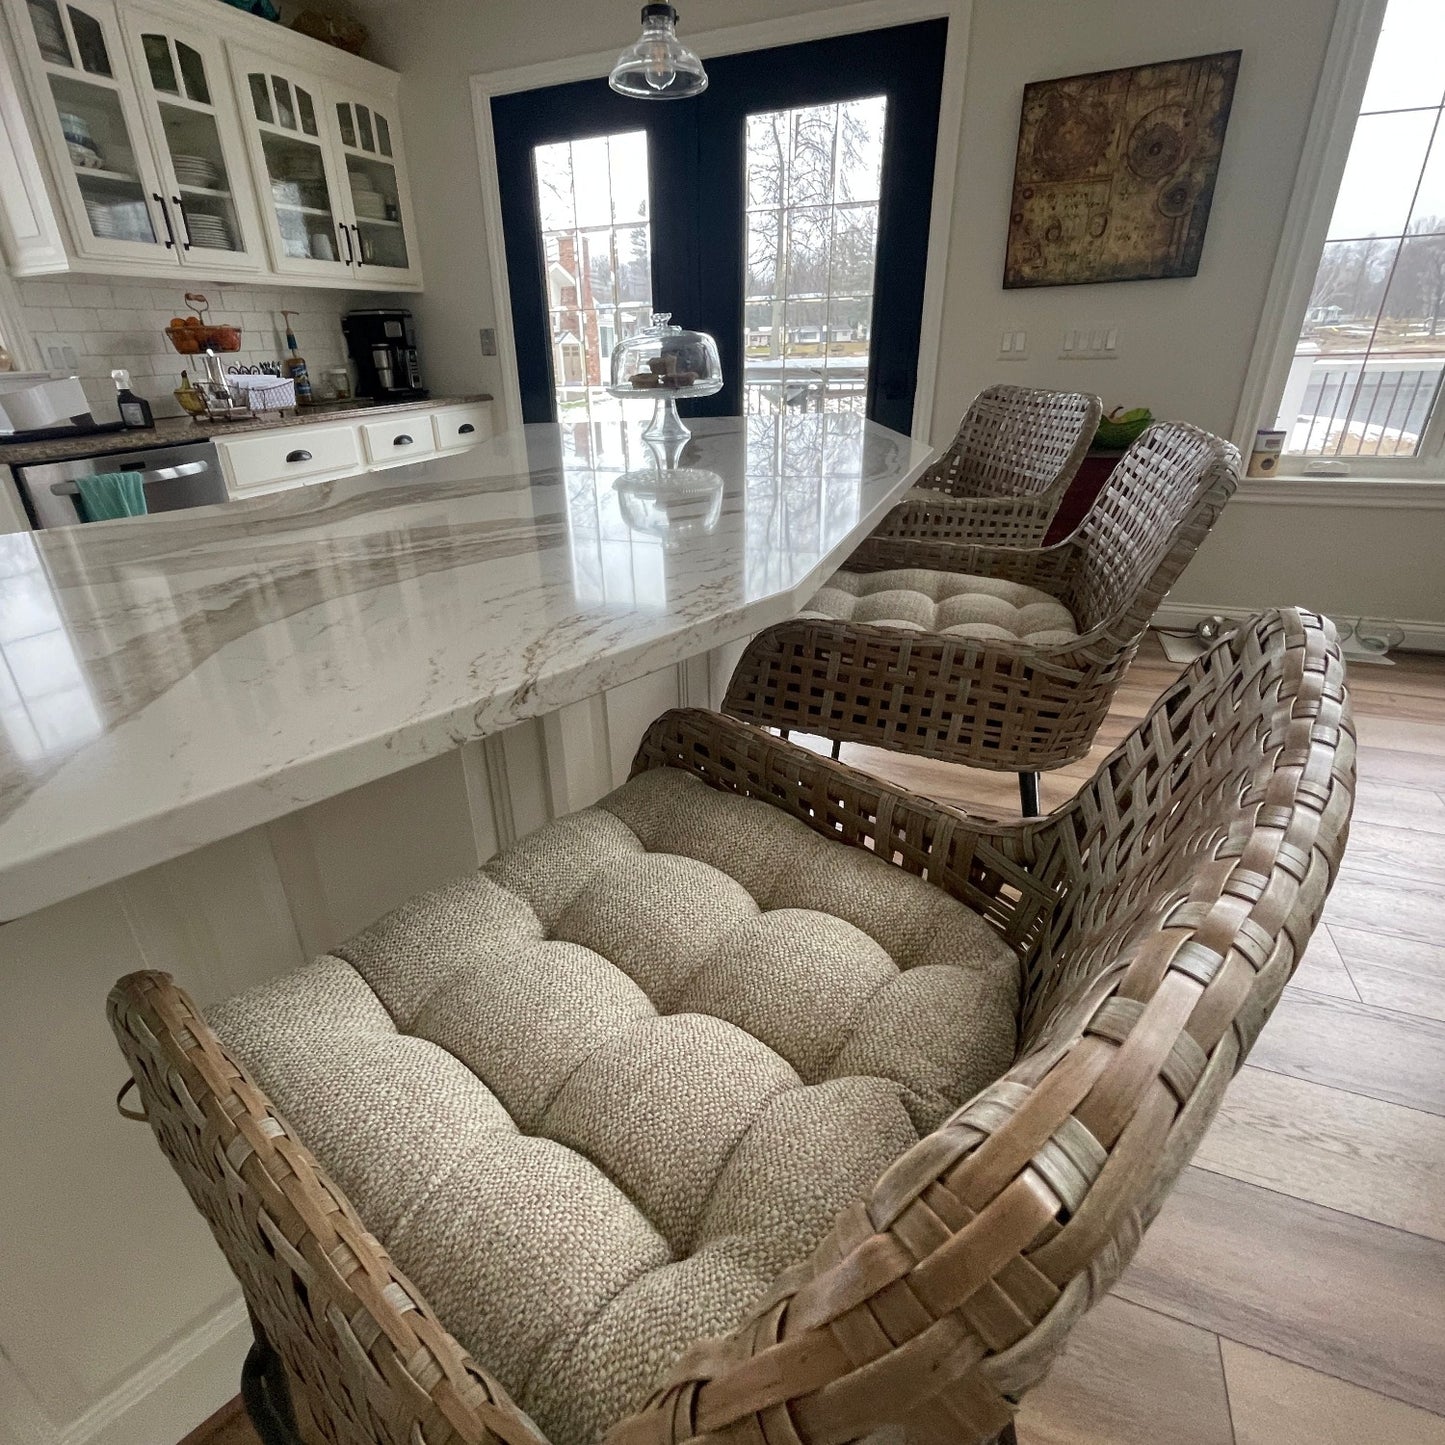 neutral colored wicker chair cushions in a cream upholstery fabric with a tweed texture on bar chairs at the kitchen island